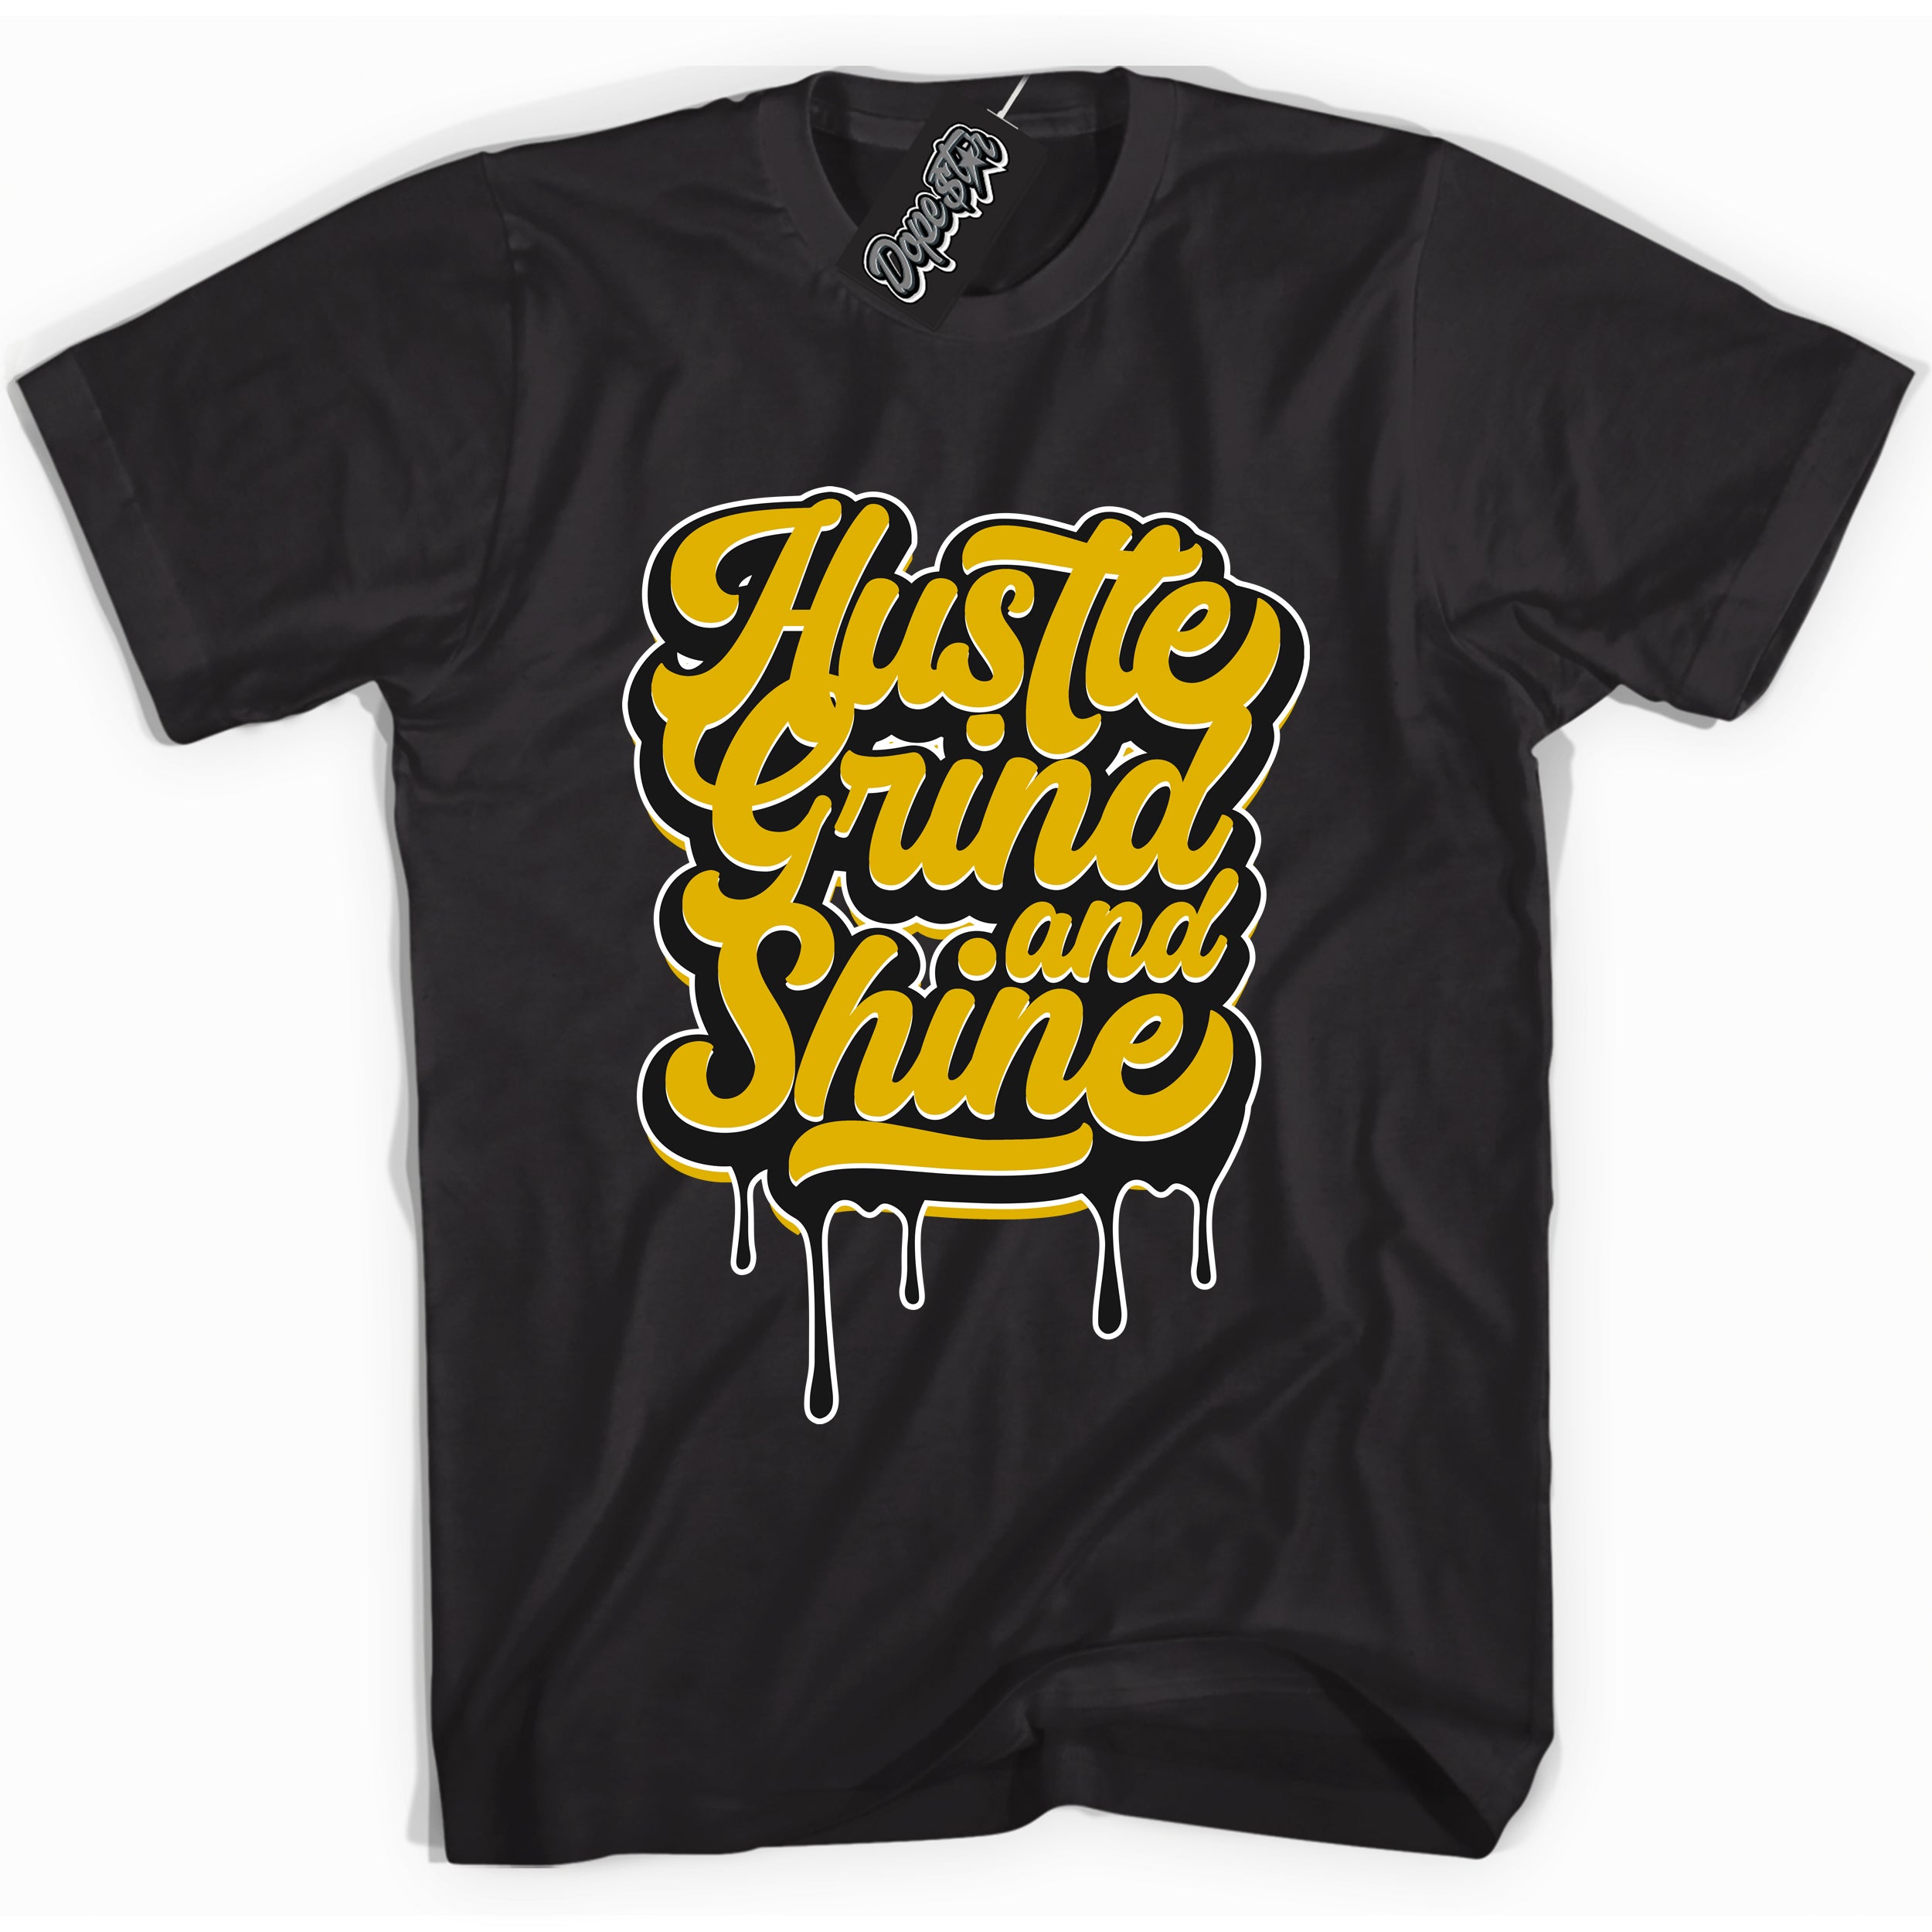 Cool Black Shirt with “ Hustle Grind And Shine ” design that perfectly matches Yellow Ochre 6s Sneakers.